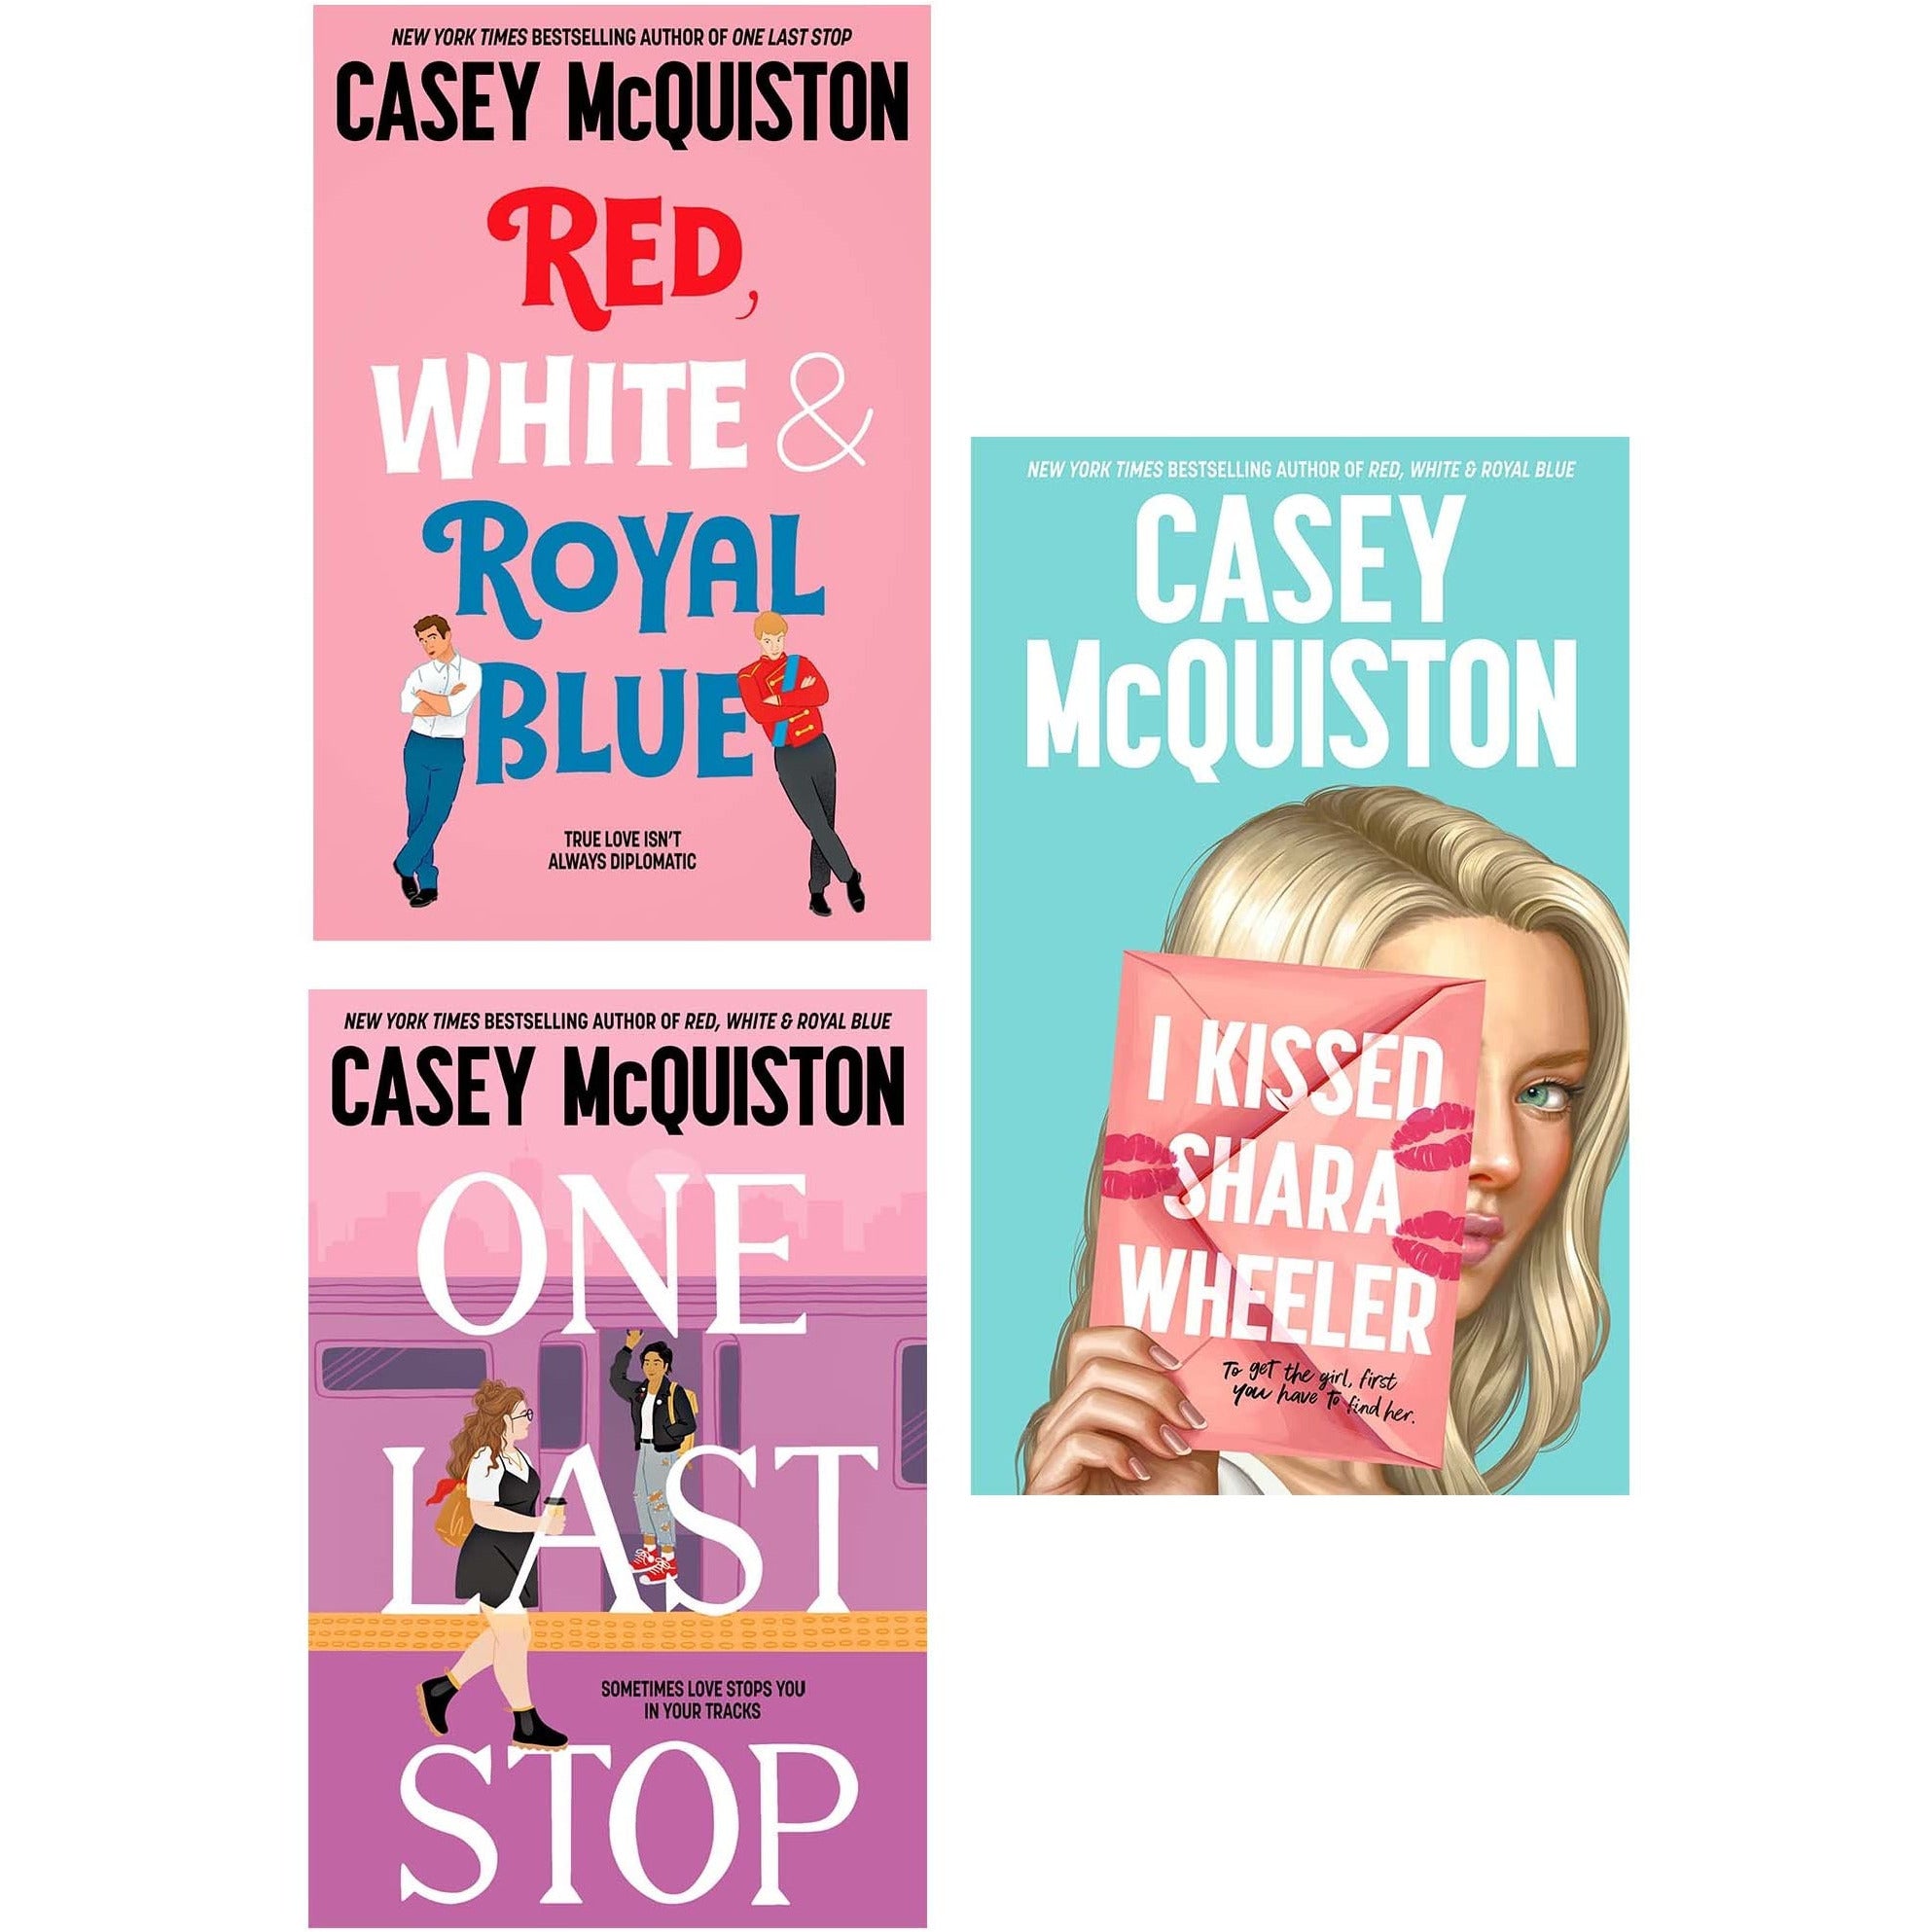 Blue,　[Hardback])　Last　Kissed　White　Casey　Red,　Stop,　Books　(One　Shara　Collection　McQuiston　Royal　I　Set　amp;　Wheeler